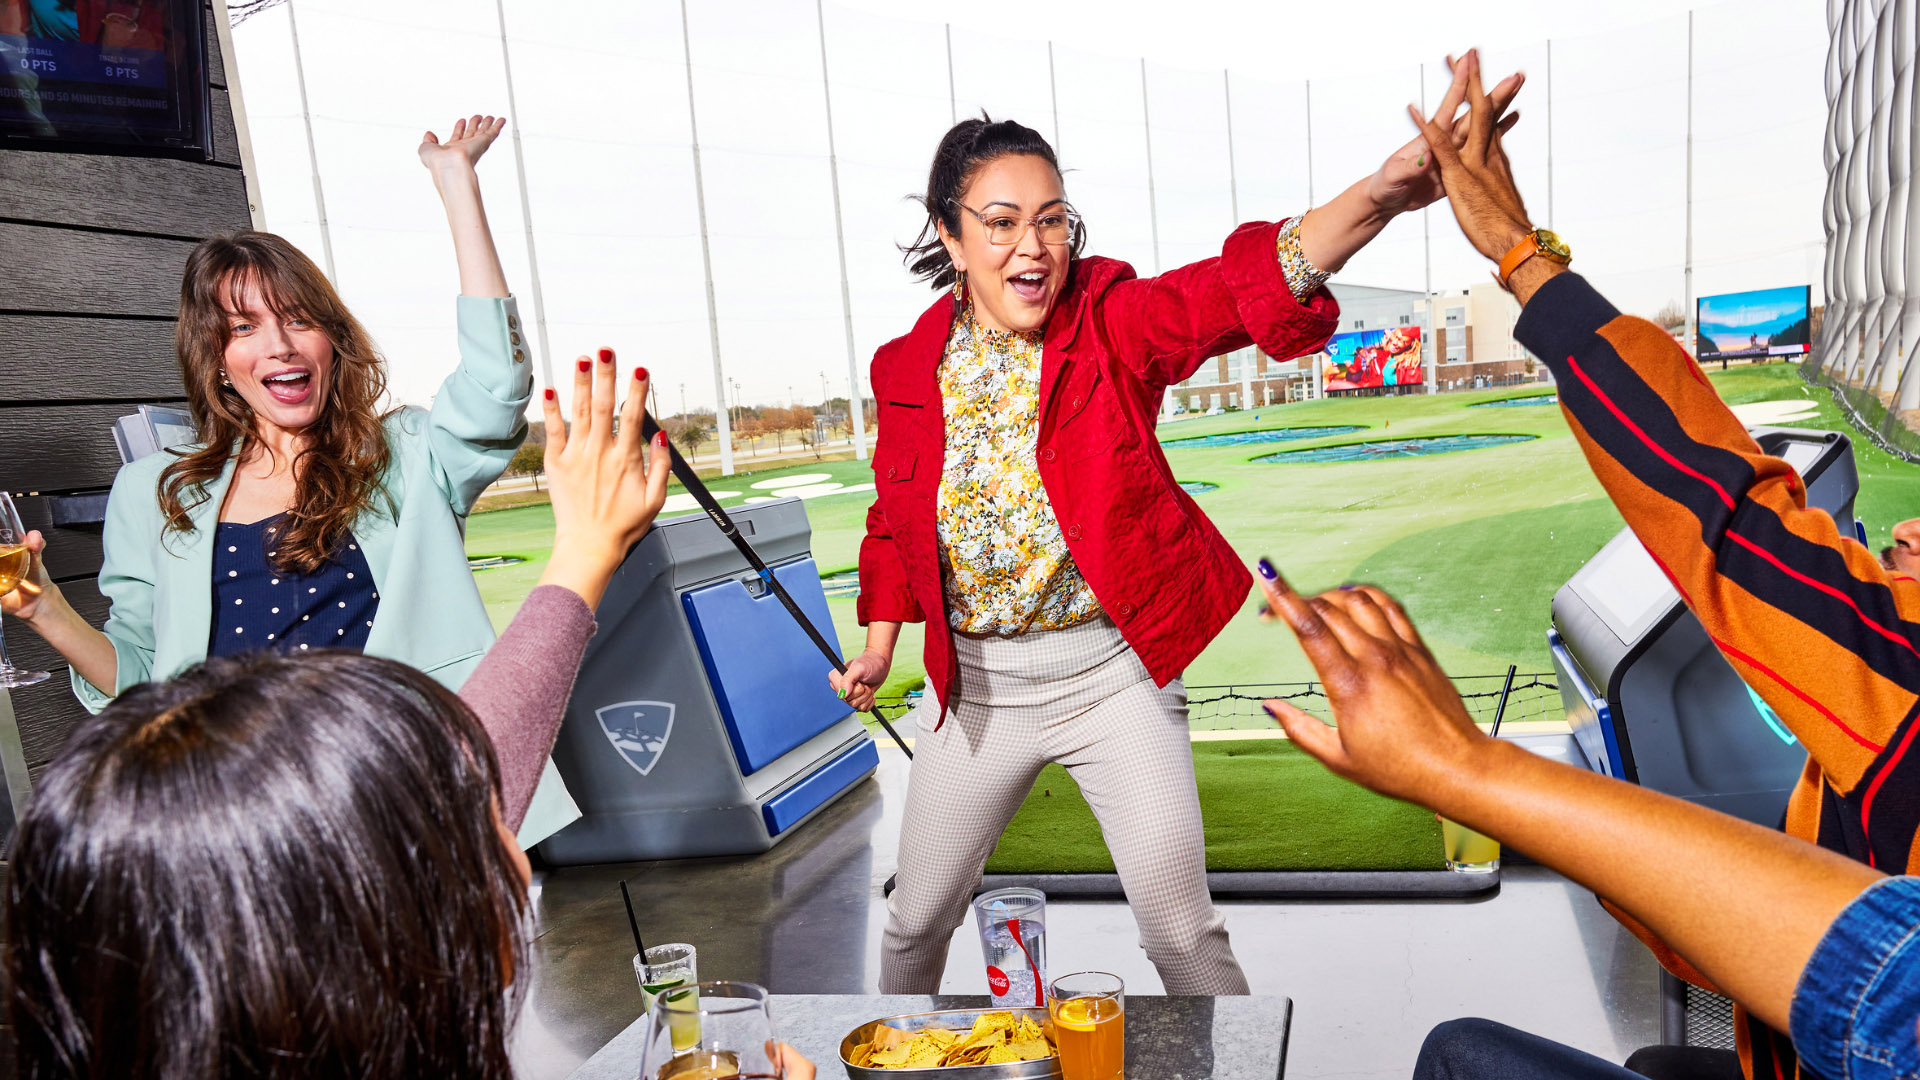 Player celebrating in a bay at Topgolf